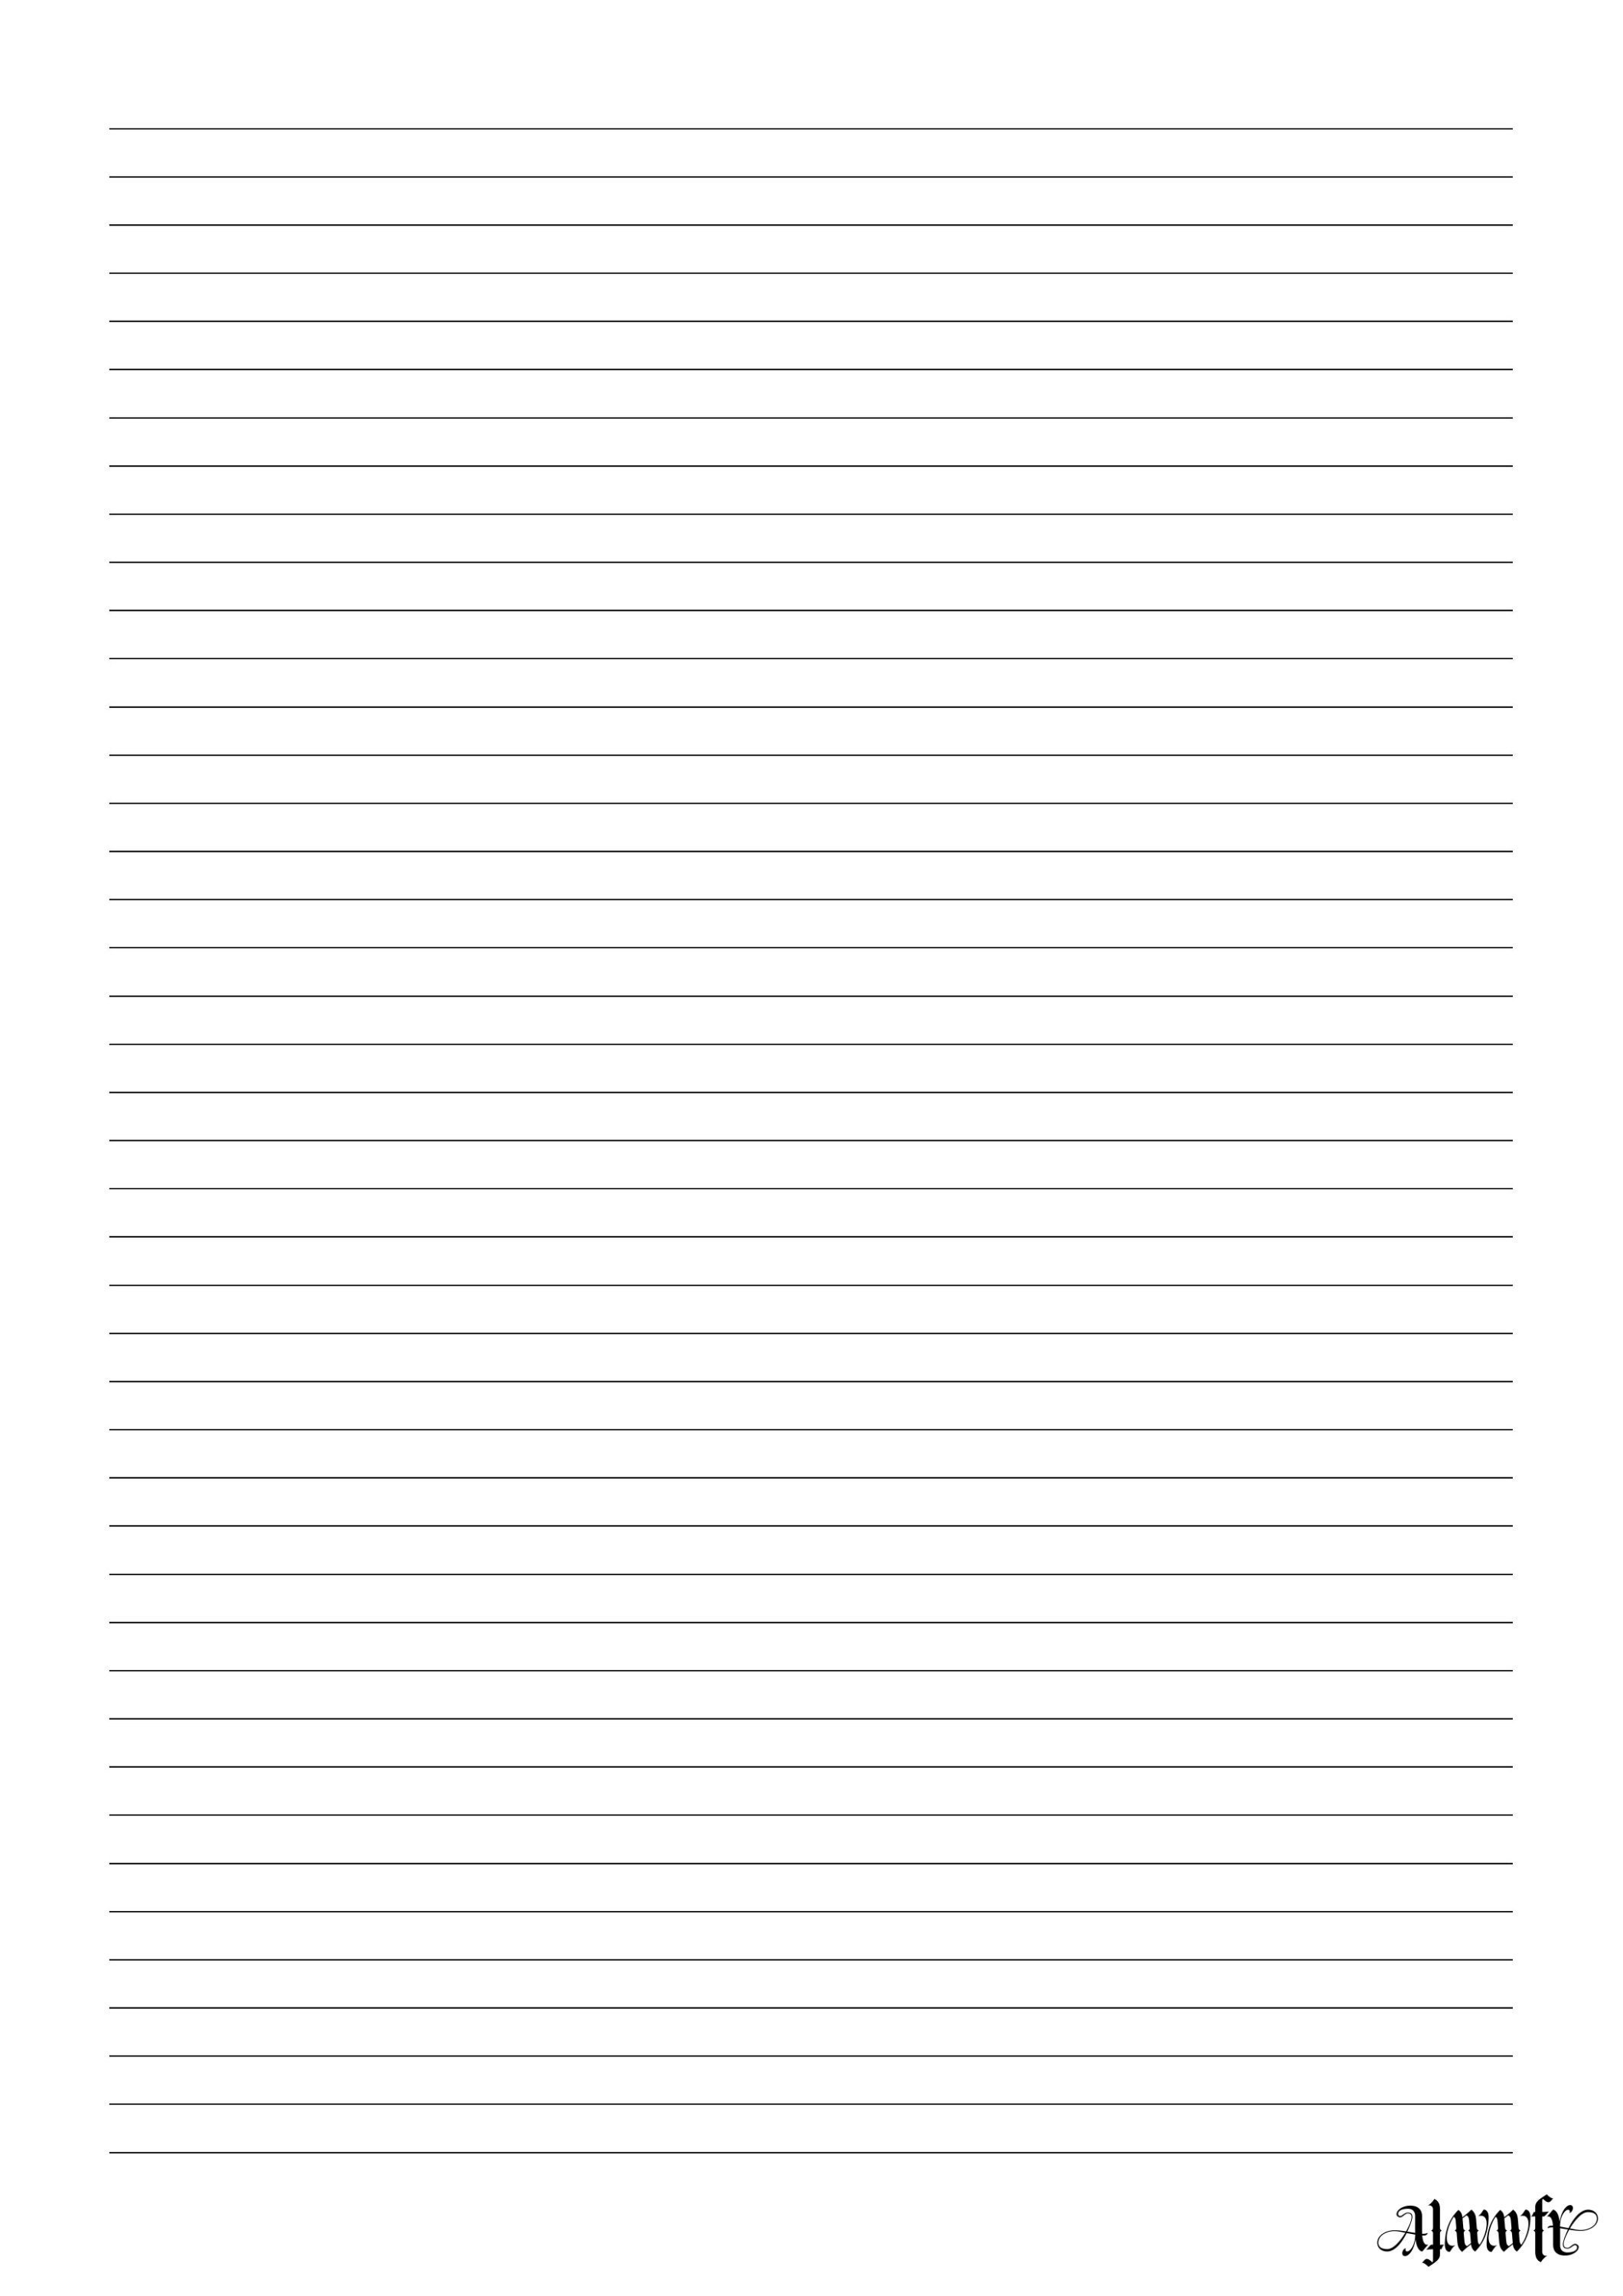 a4-lined-paper-tunersread